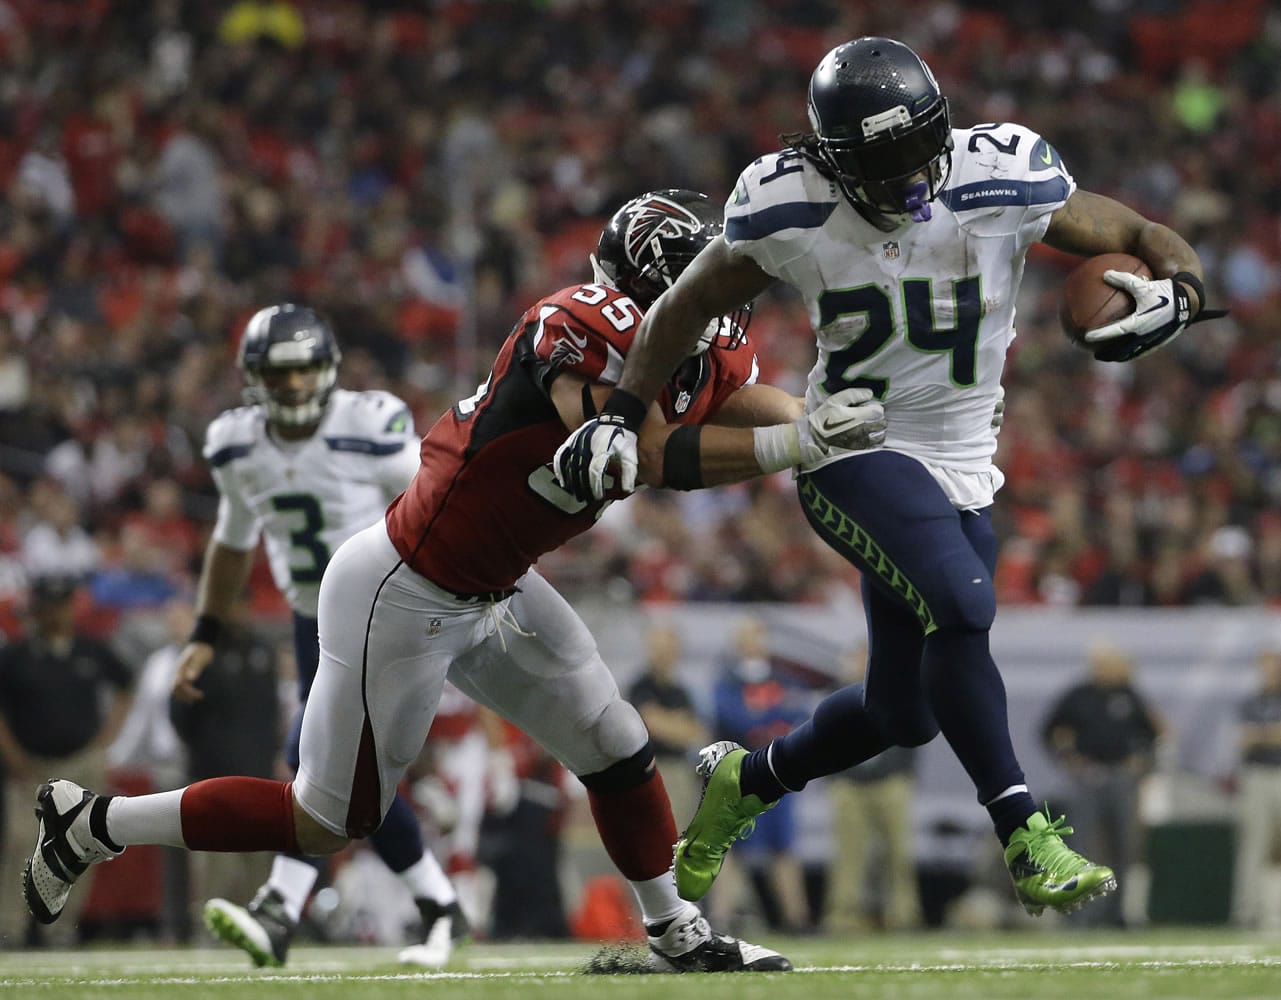 Seattle's Marshawn Lynch (24) moves the ball as Atlanta's Paul Worrilow (55) defends Sunday. Lynch ran for 145 yards and a touchdown in the Seahawks' 33-10 victory.